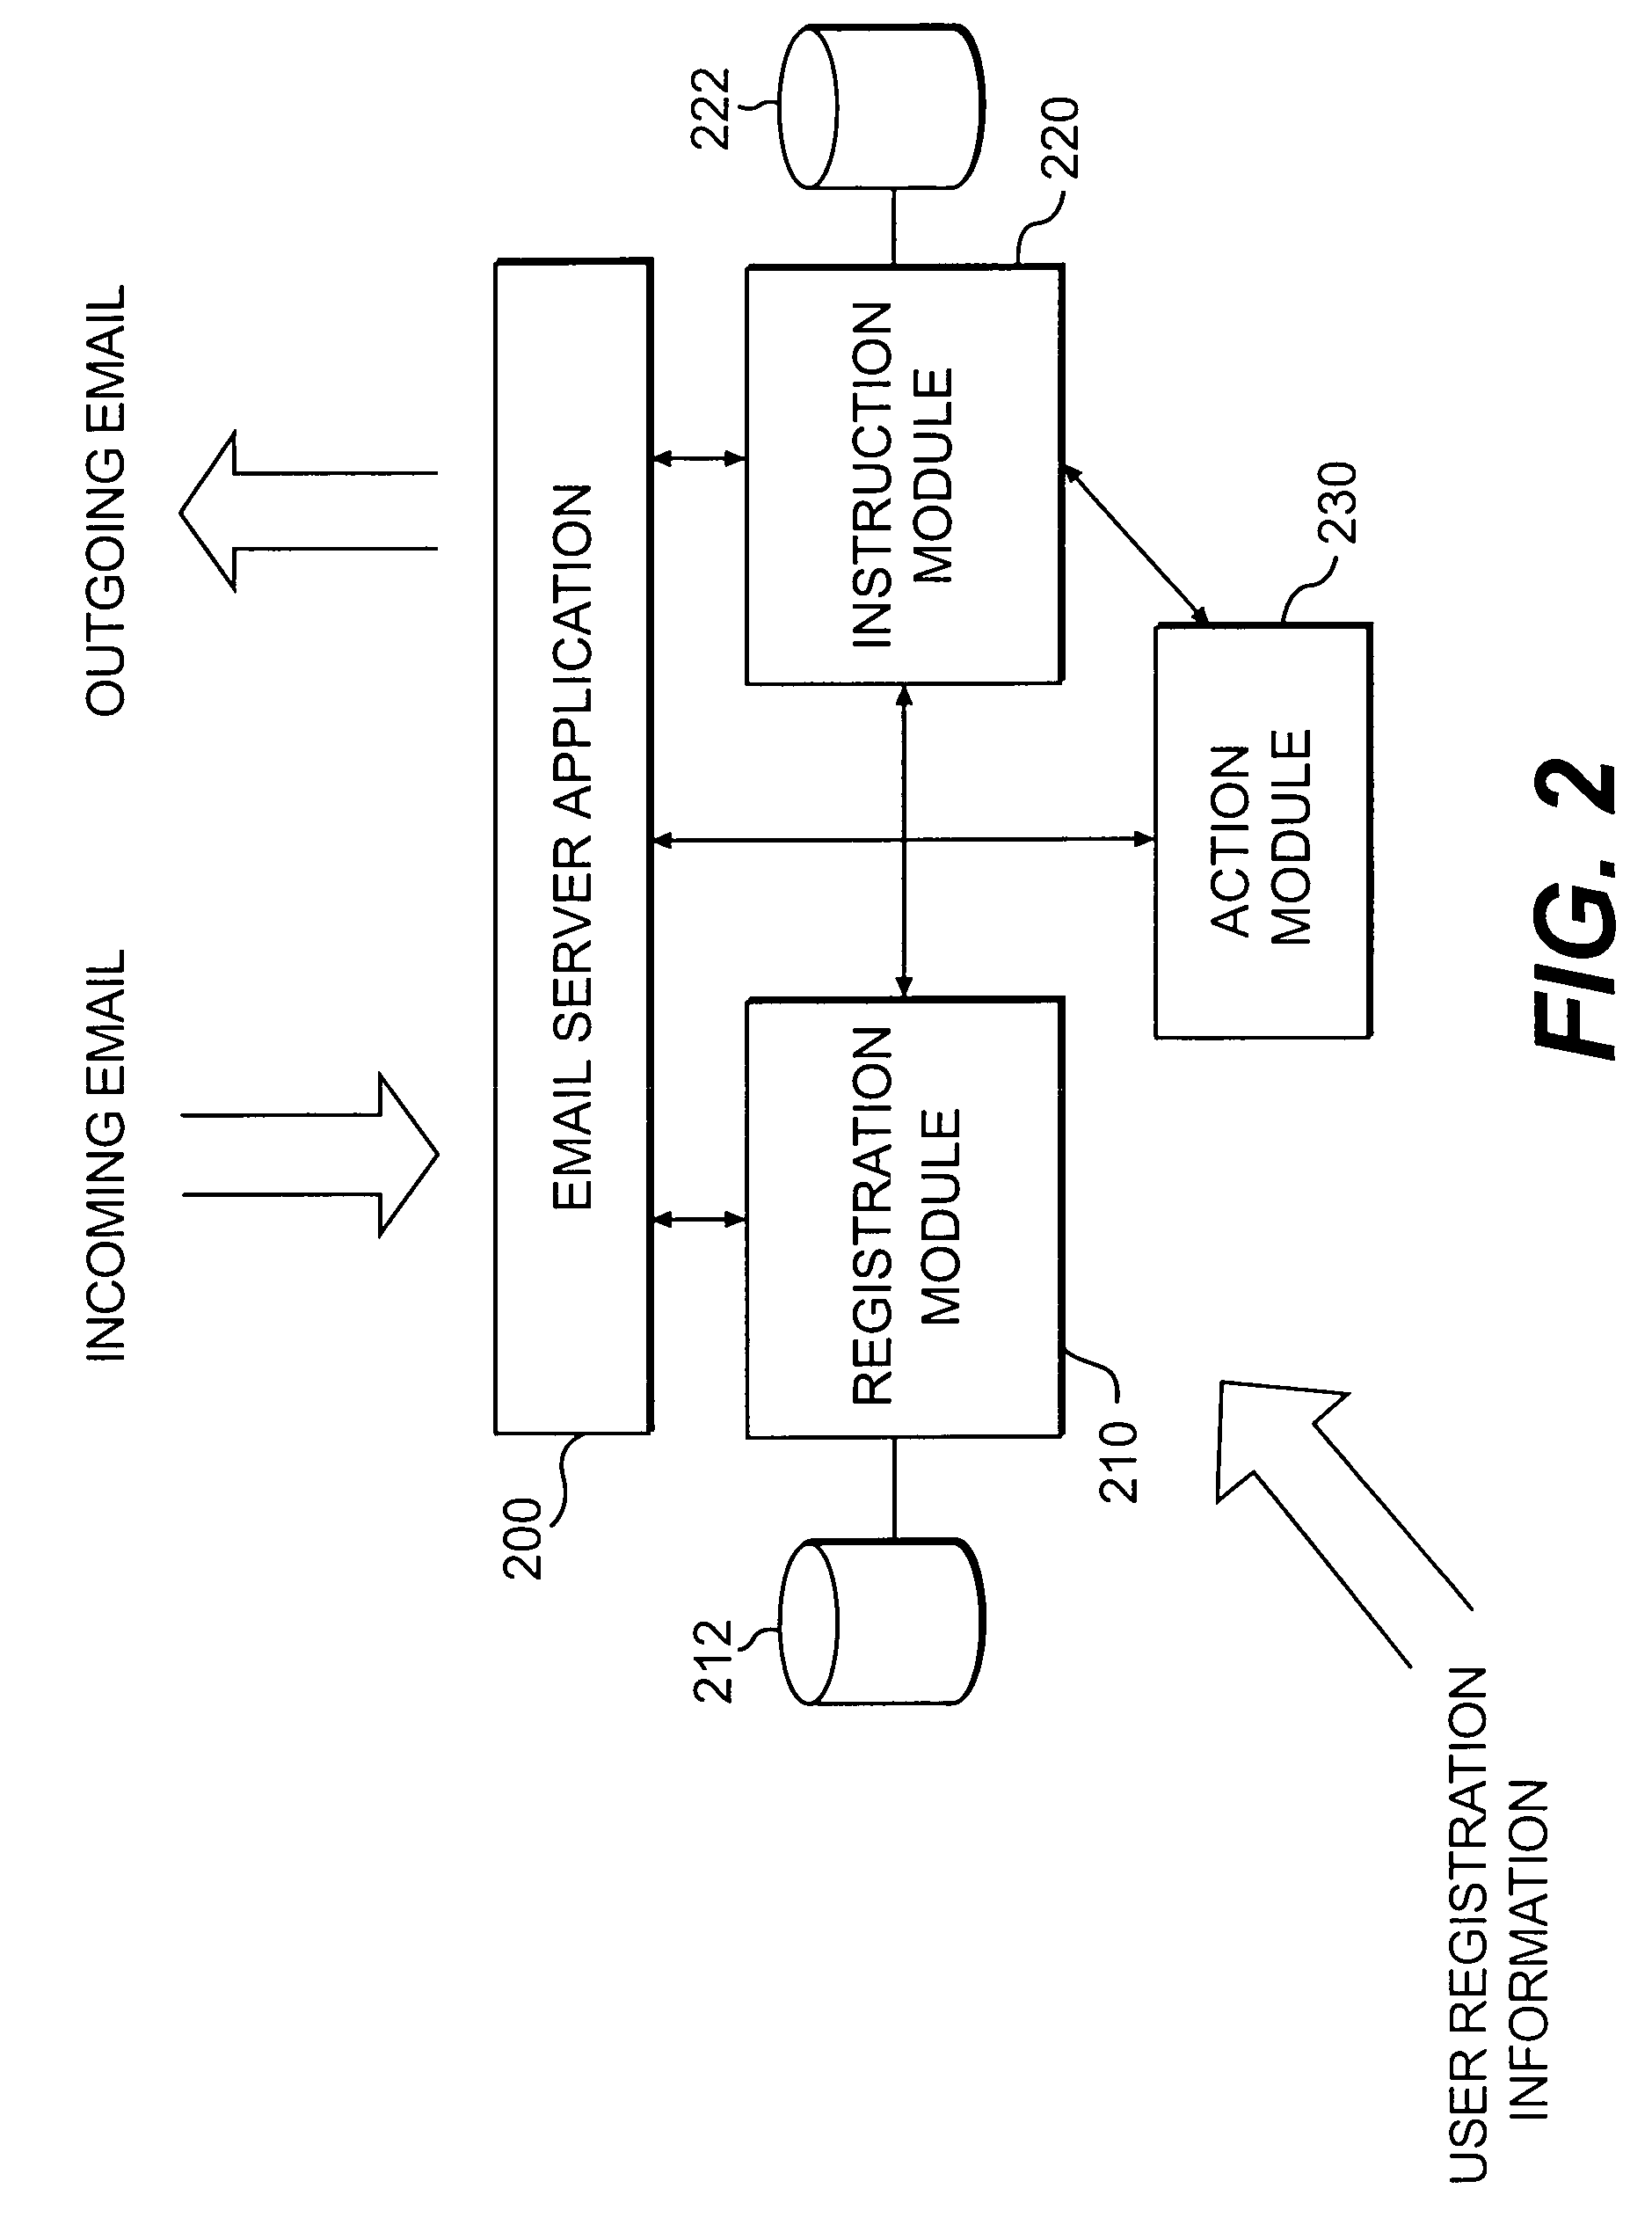 System and method for distributing portable computer virus definition records with binary file conversion